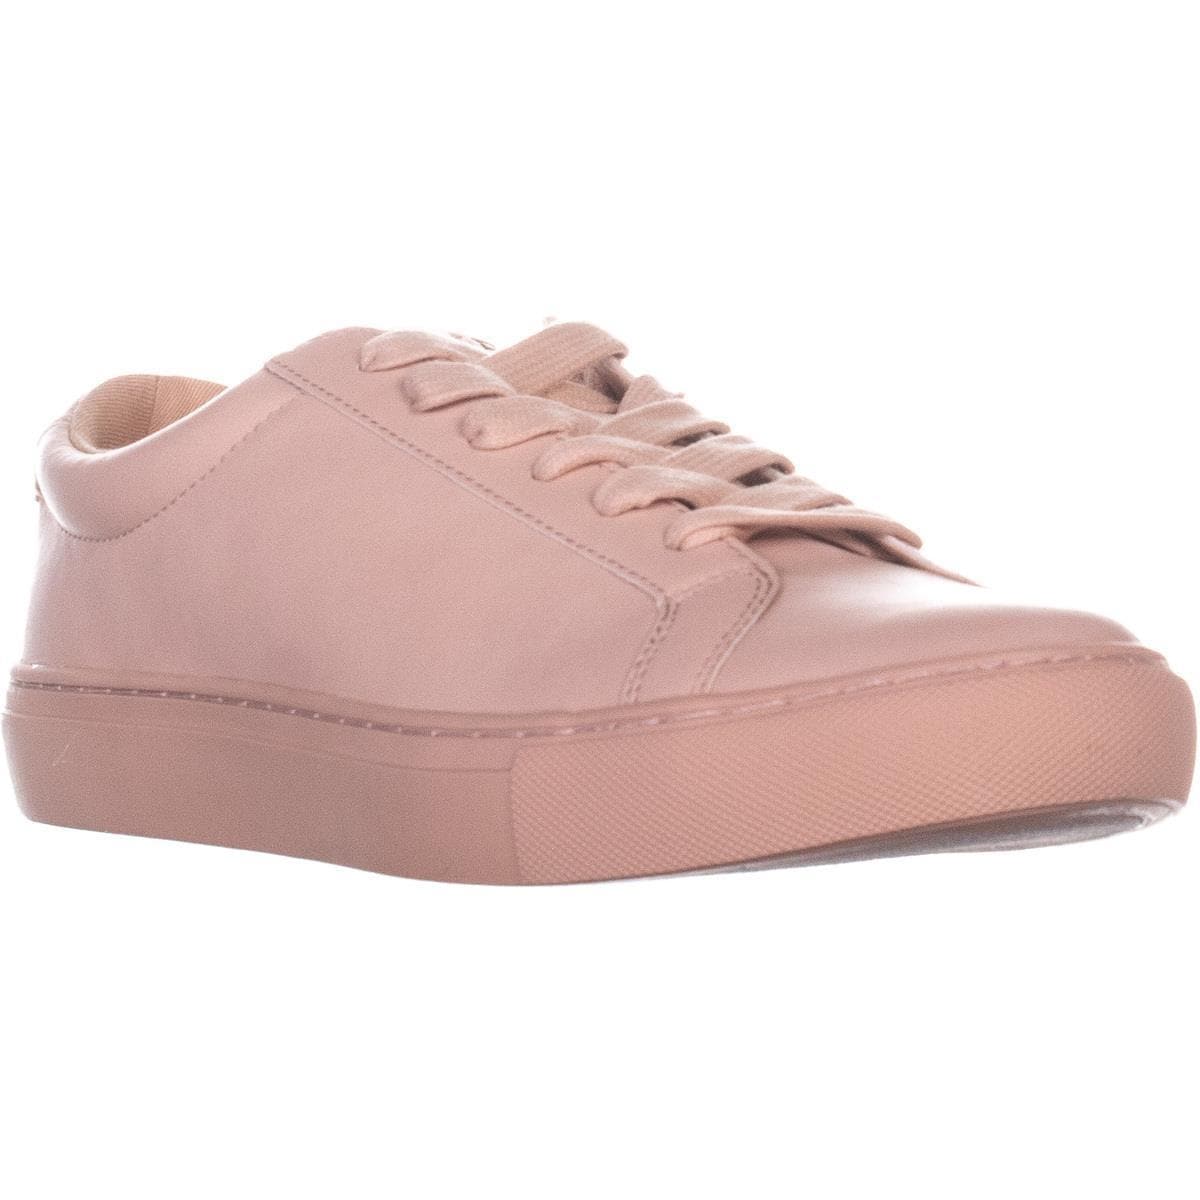 guess pink sneakers